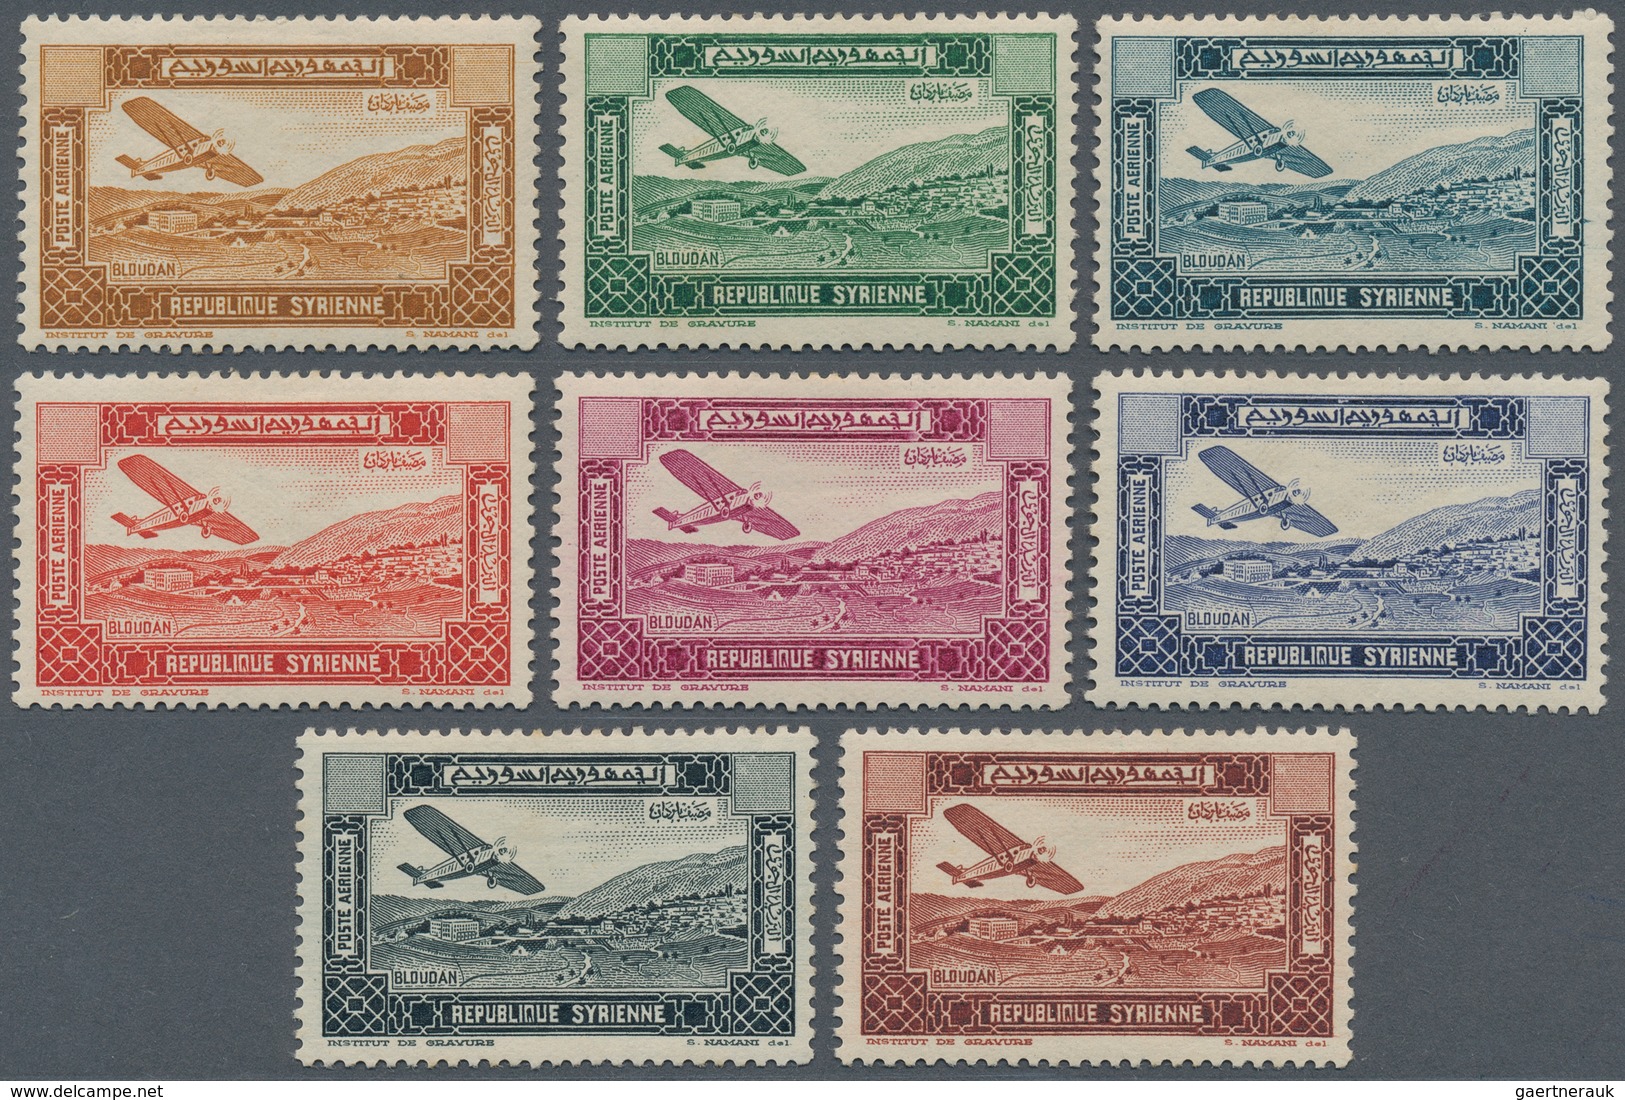 Syrien: 1934, 10 Years Republic Air Mail Issue 10 Proofs Without Value In Issued Colors, Mint Hinged - Syrie